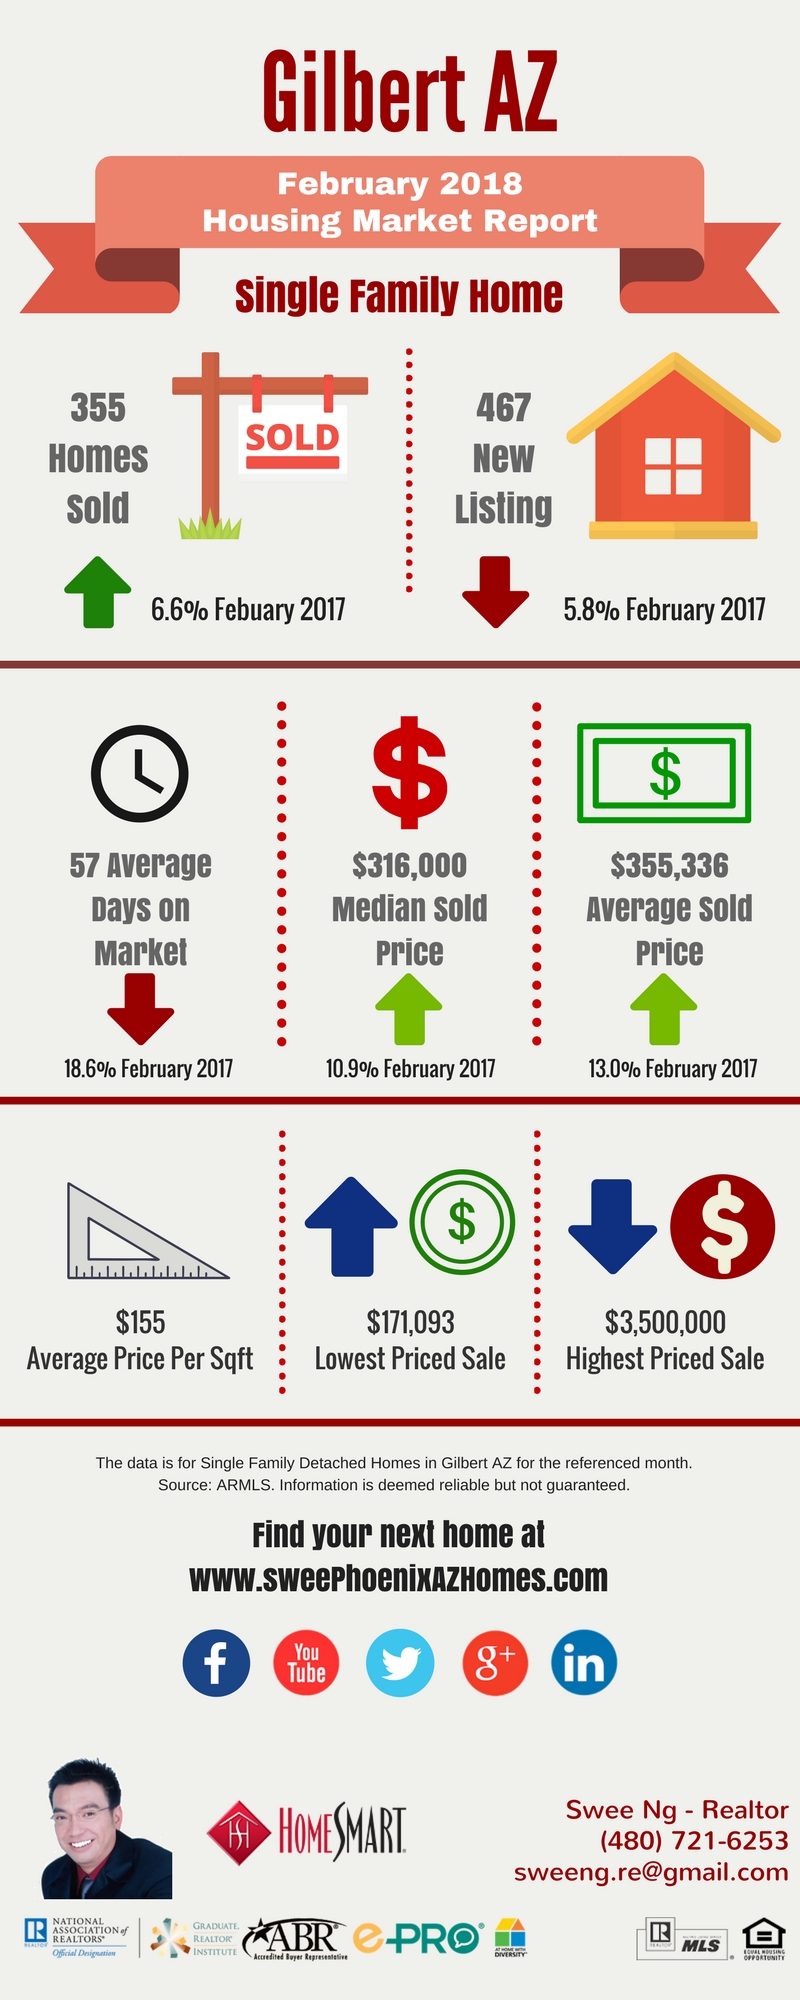 Gilbert AZ Housing Market Trends Report February 2018 by Swee Ng, Real Estate and House Value